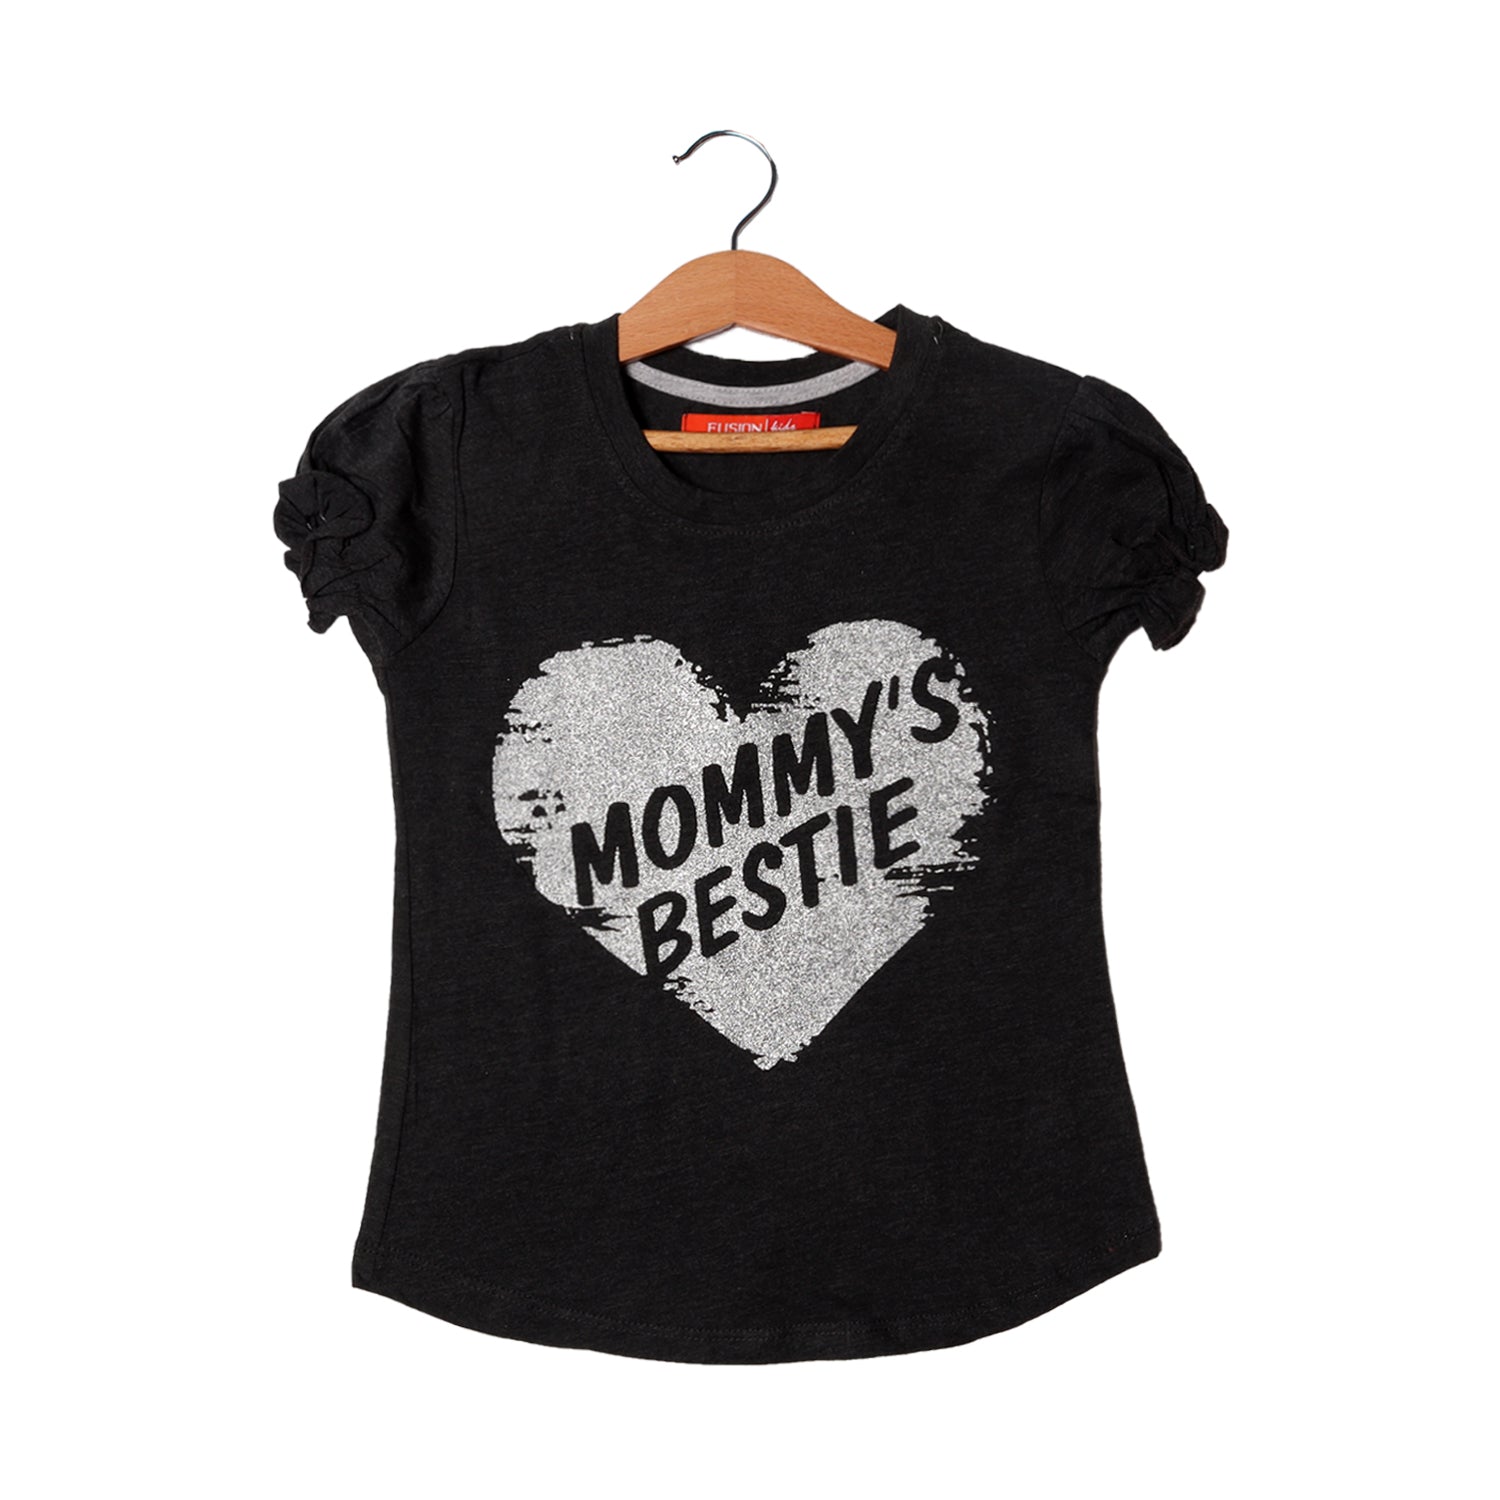 CHARCOAL GREY MOMMY'S BESTIE PRINTED T-SHIRT FOR GIRLS